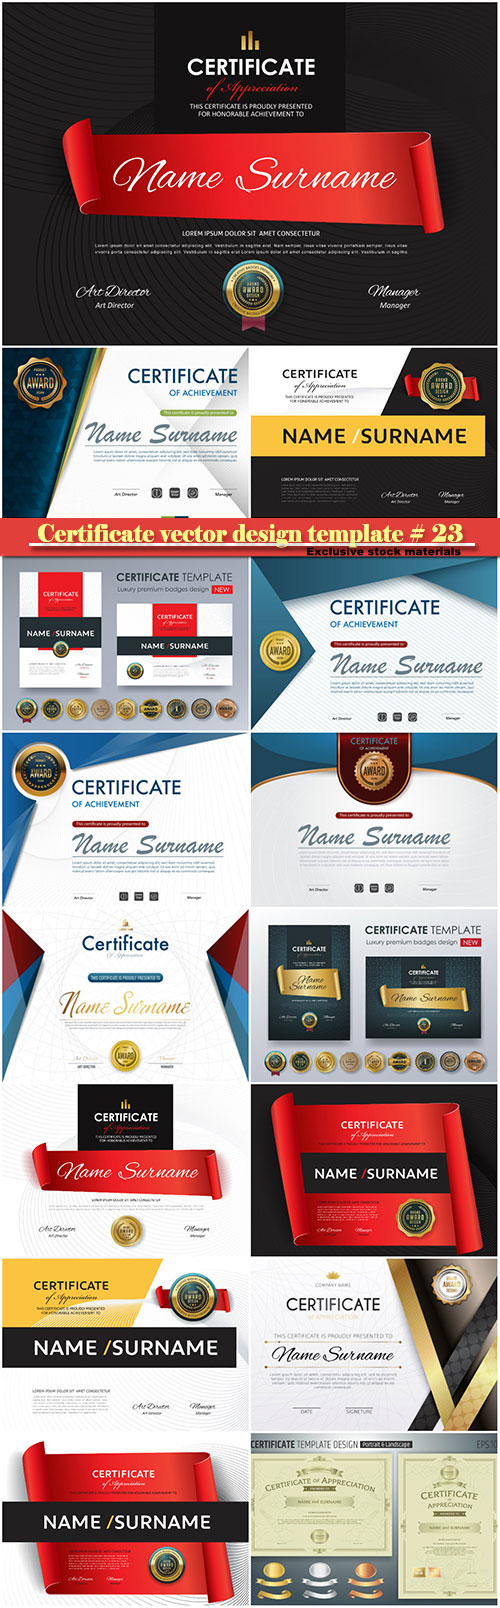 Certificate and vector diploma design template # 23